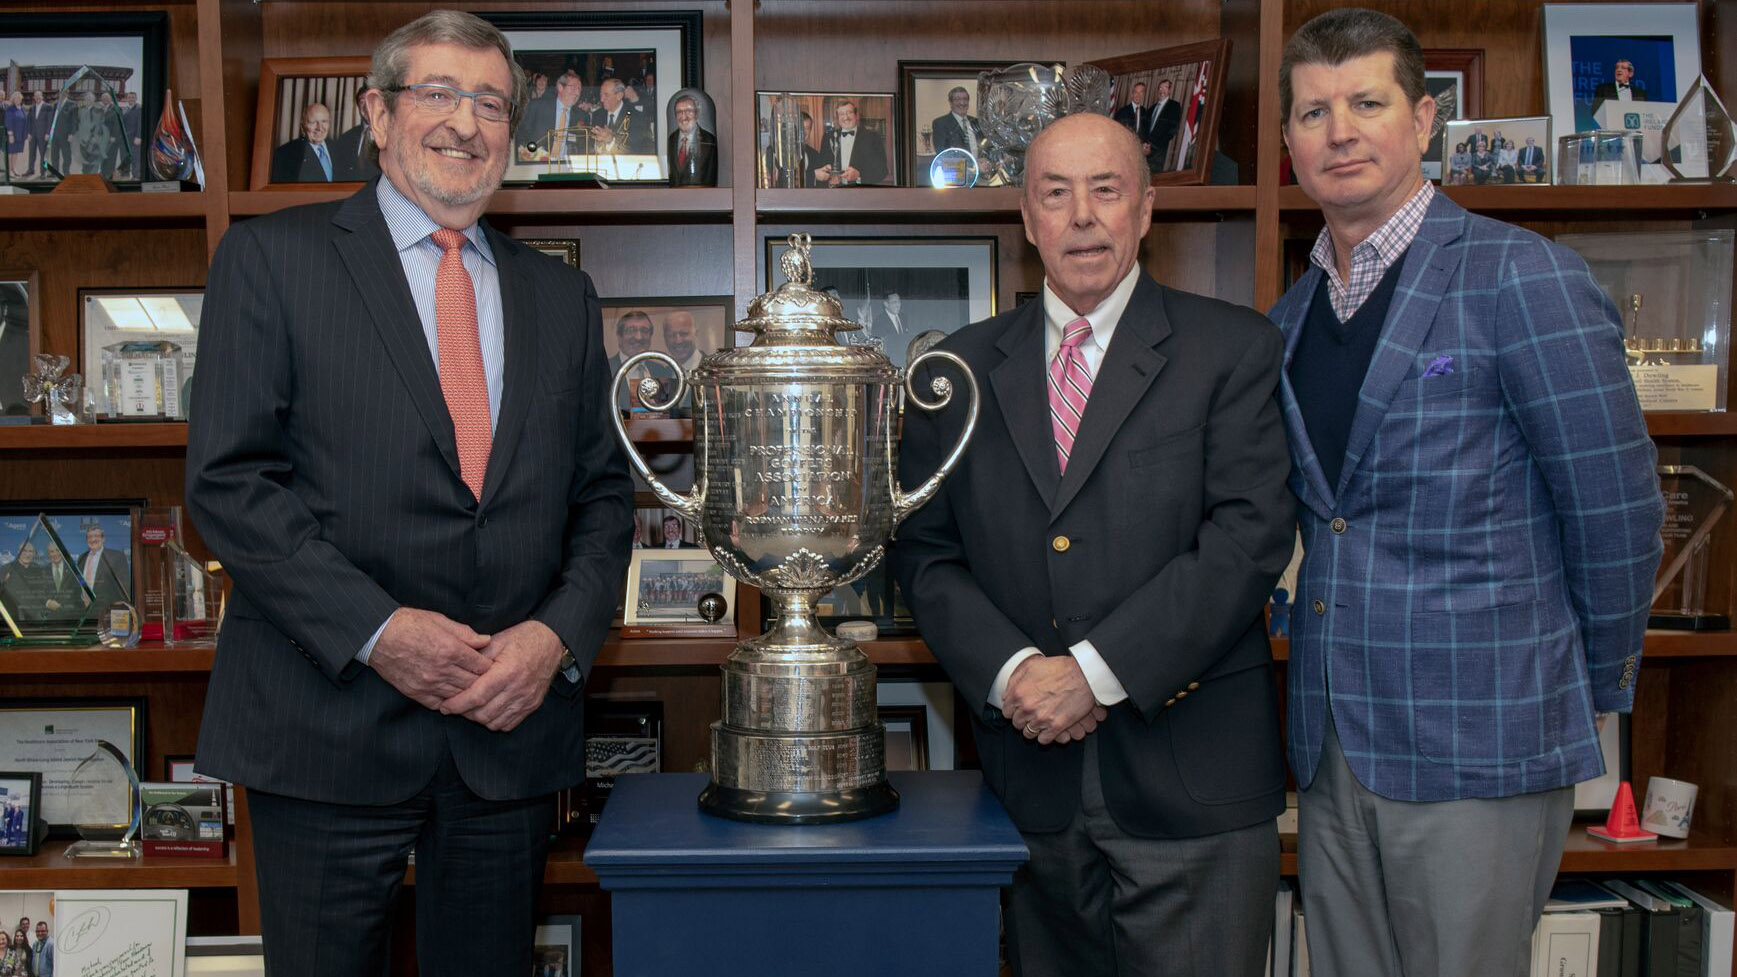 Northwell Health named official healthcare provider of the 2019 PGA Championship